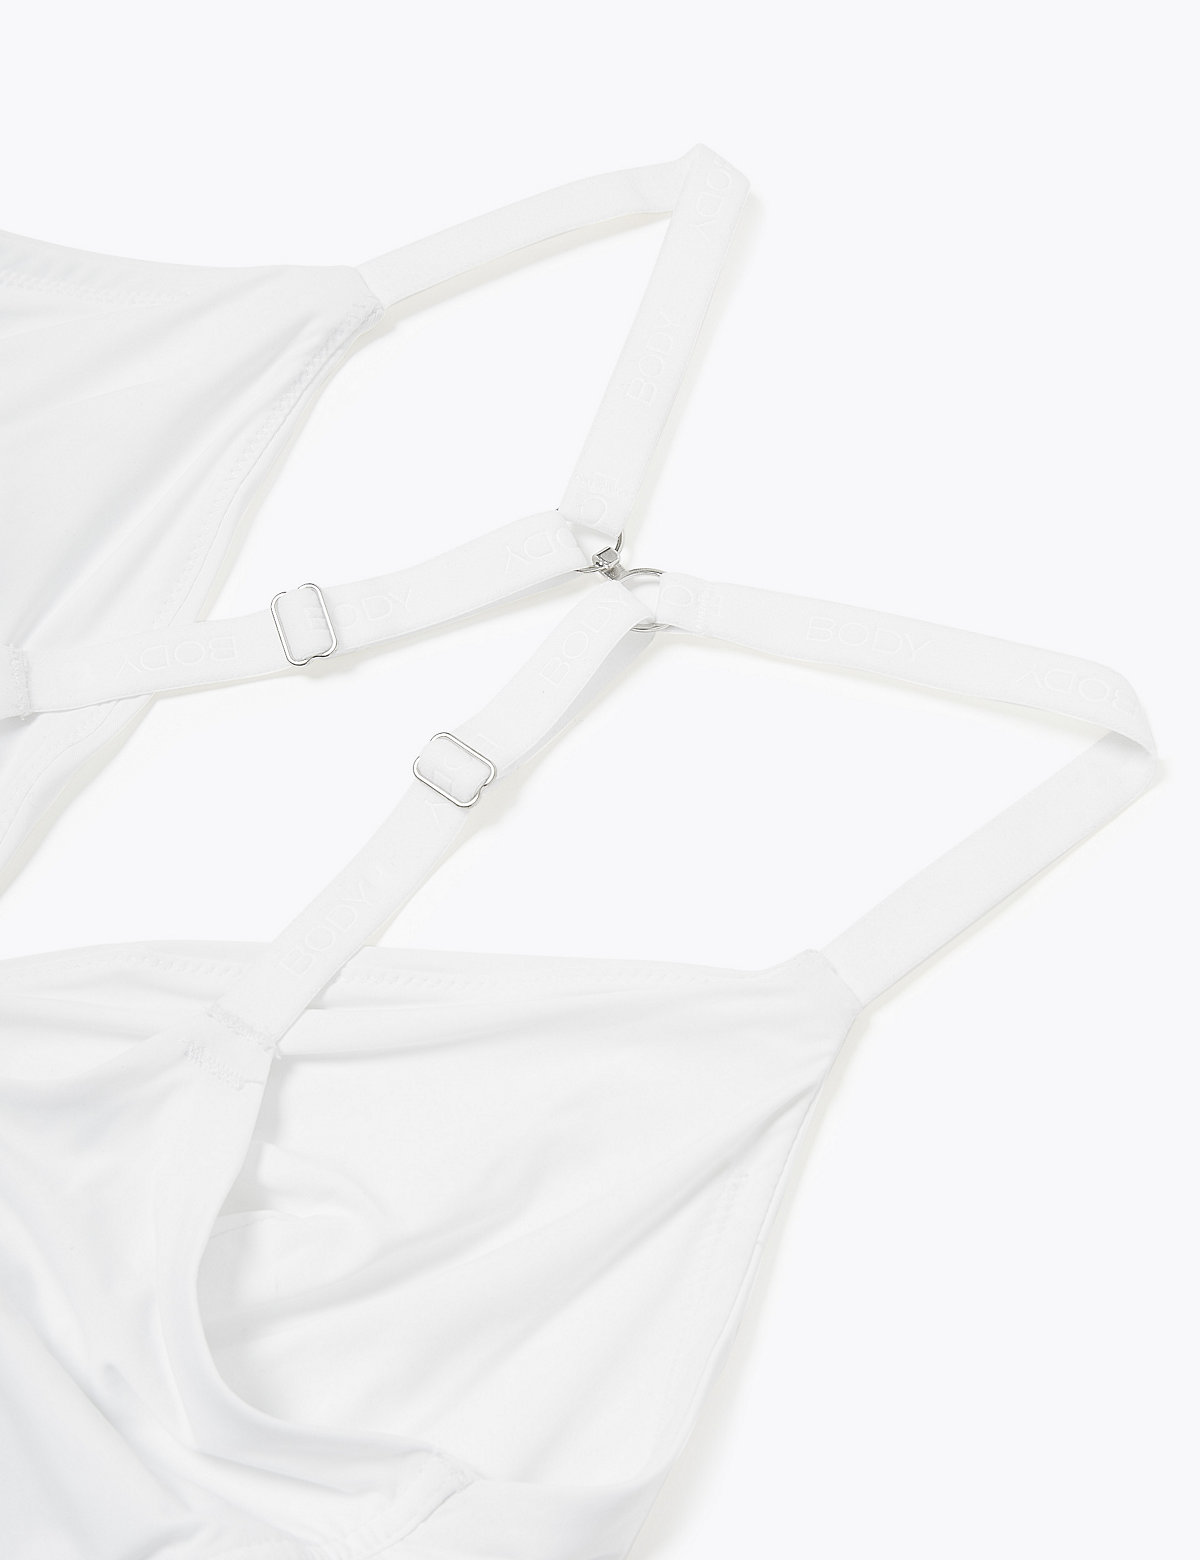 Smoothing Non-Wired Bralette